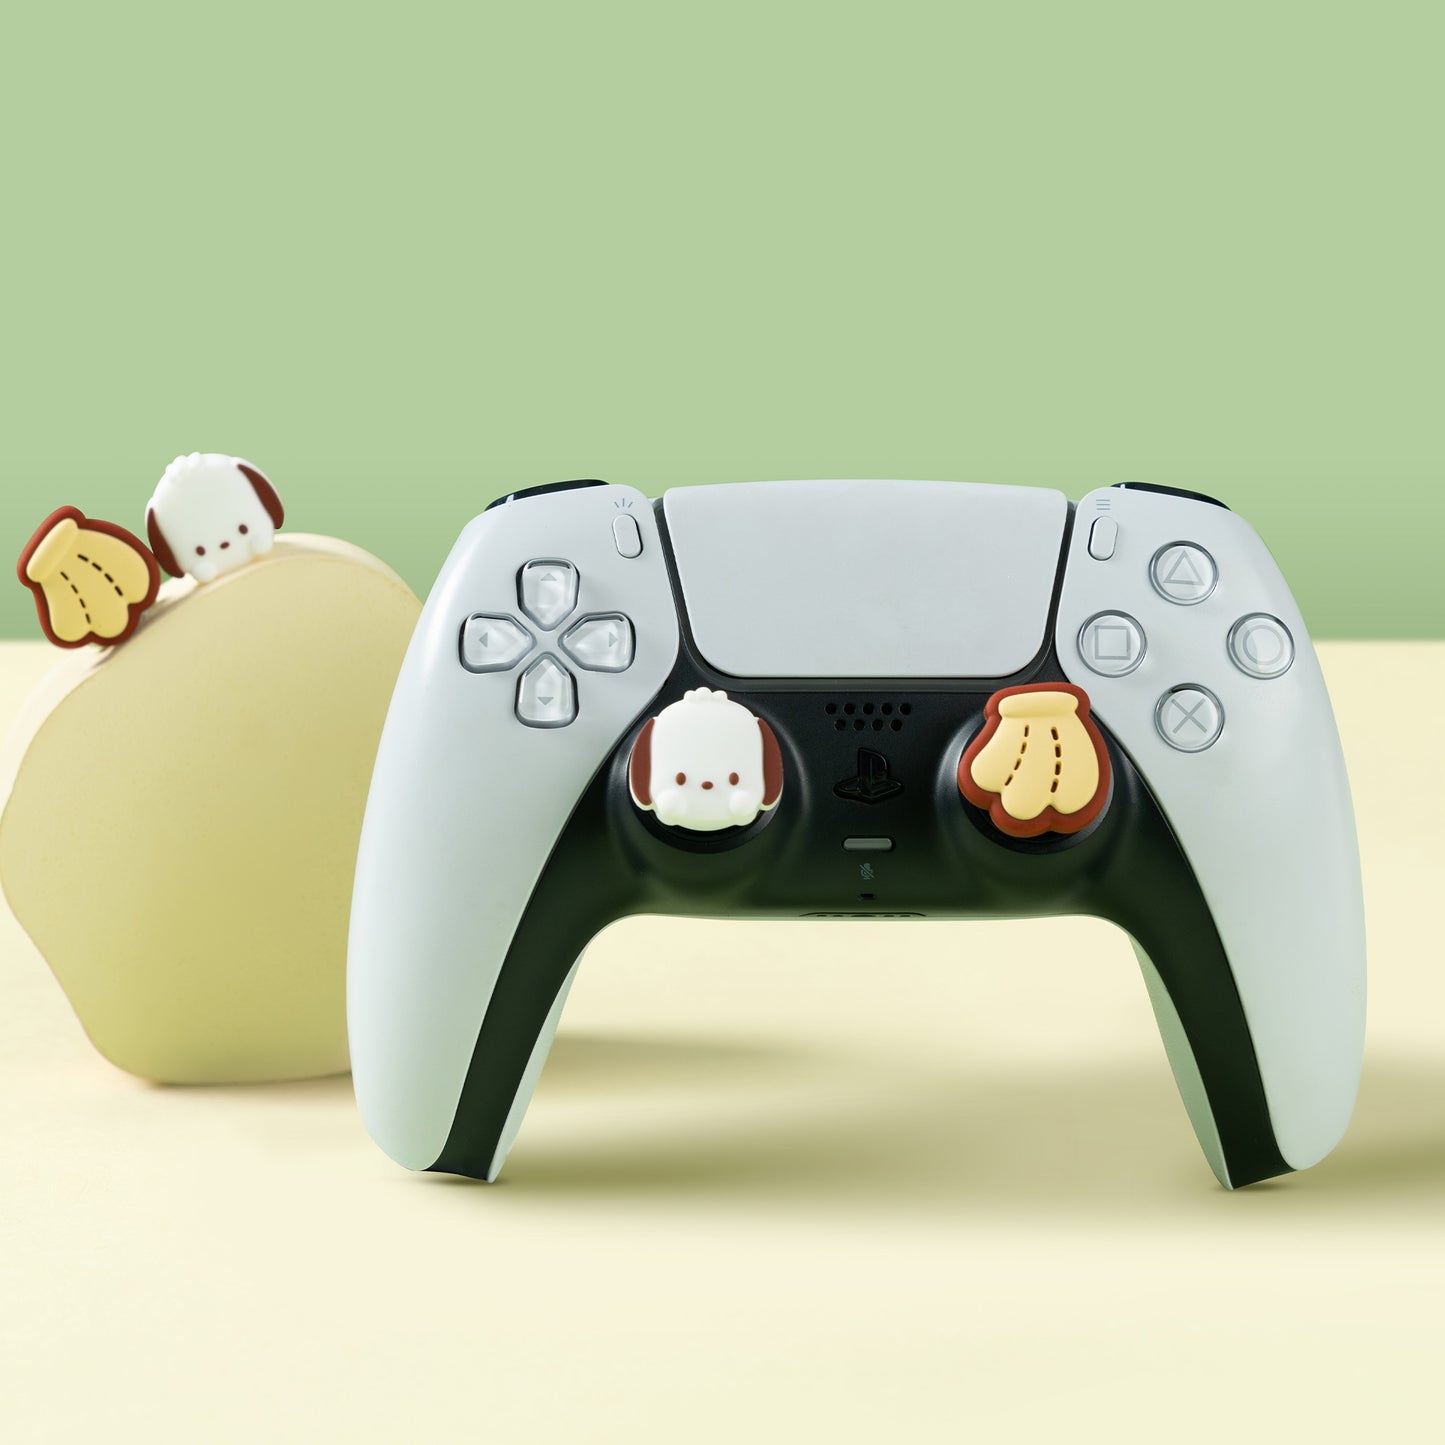 GeekShare x Sanrio Thumb Grip Caps for NS Pro/PS4/PS5